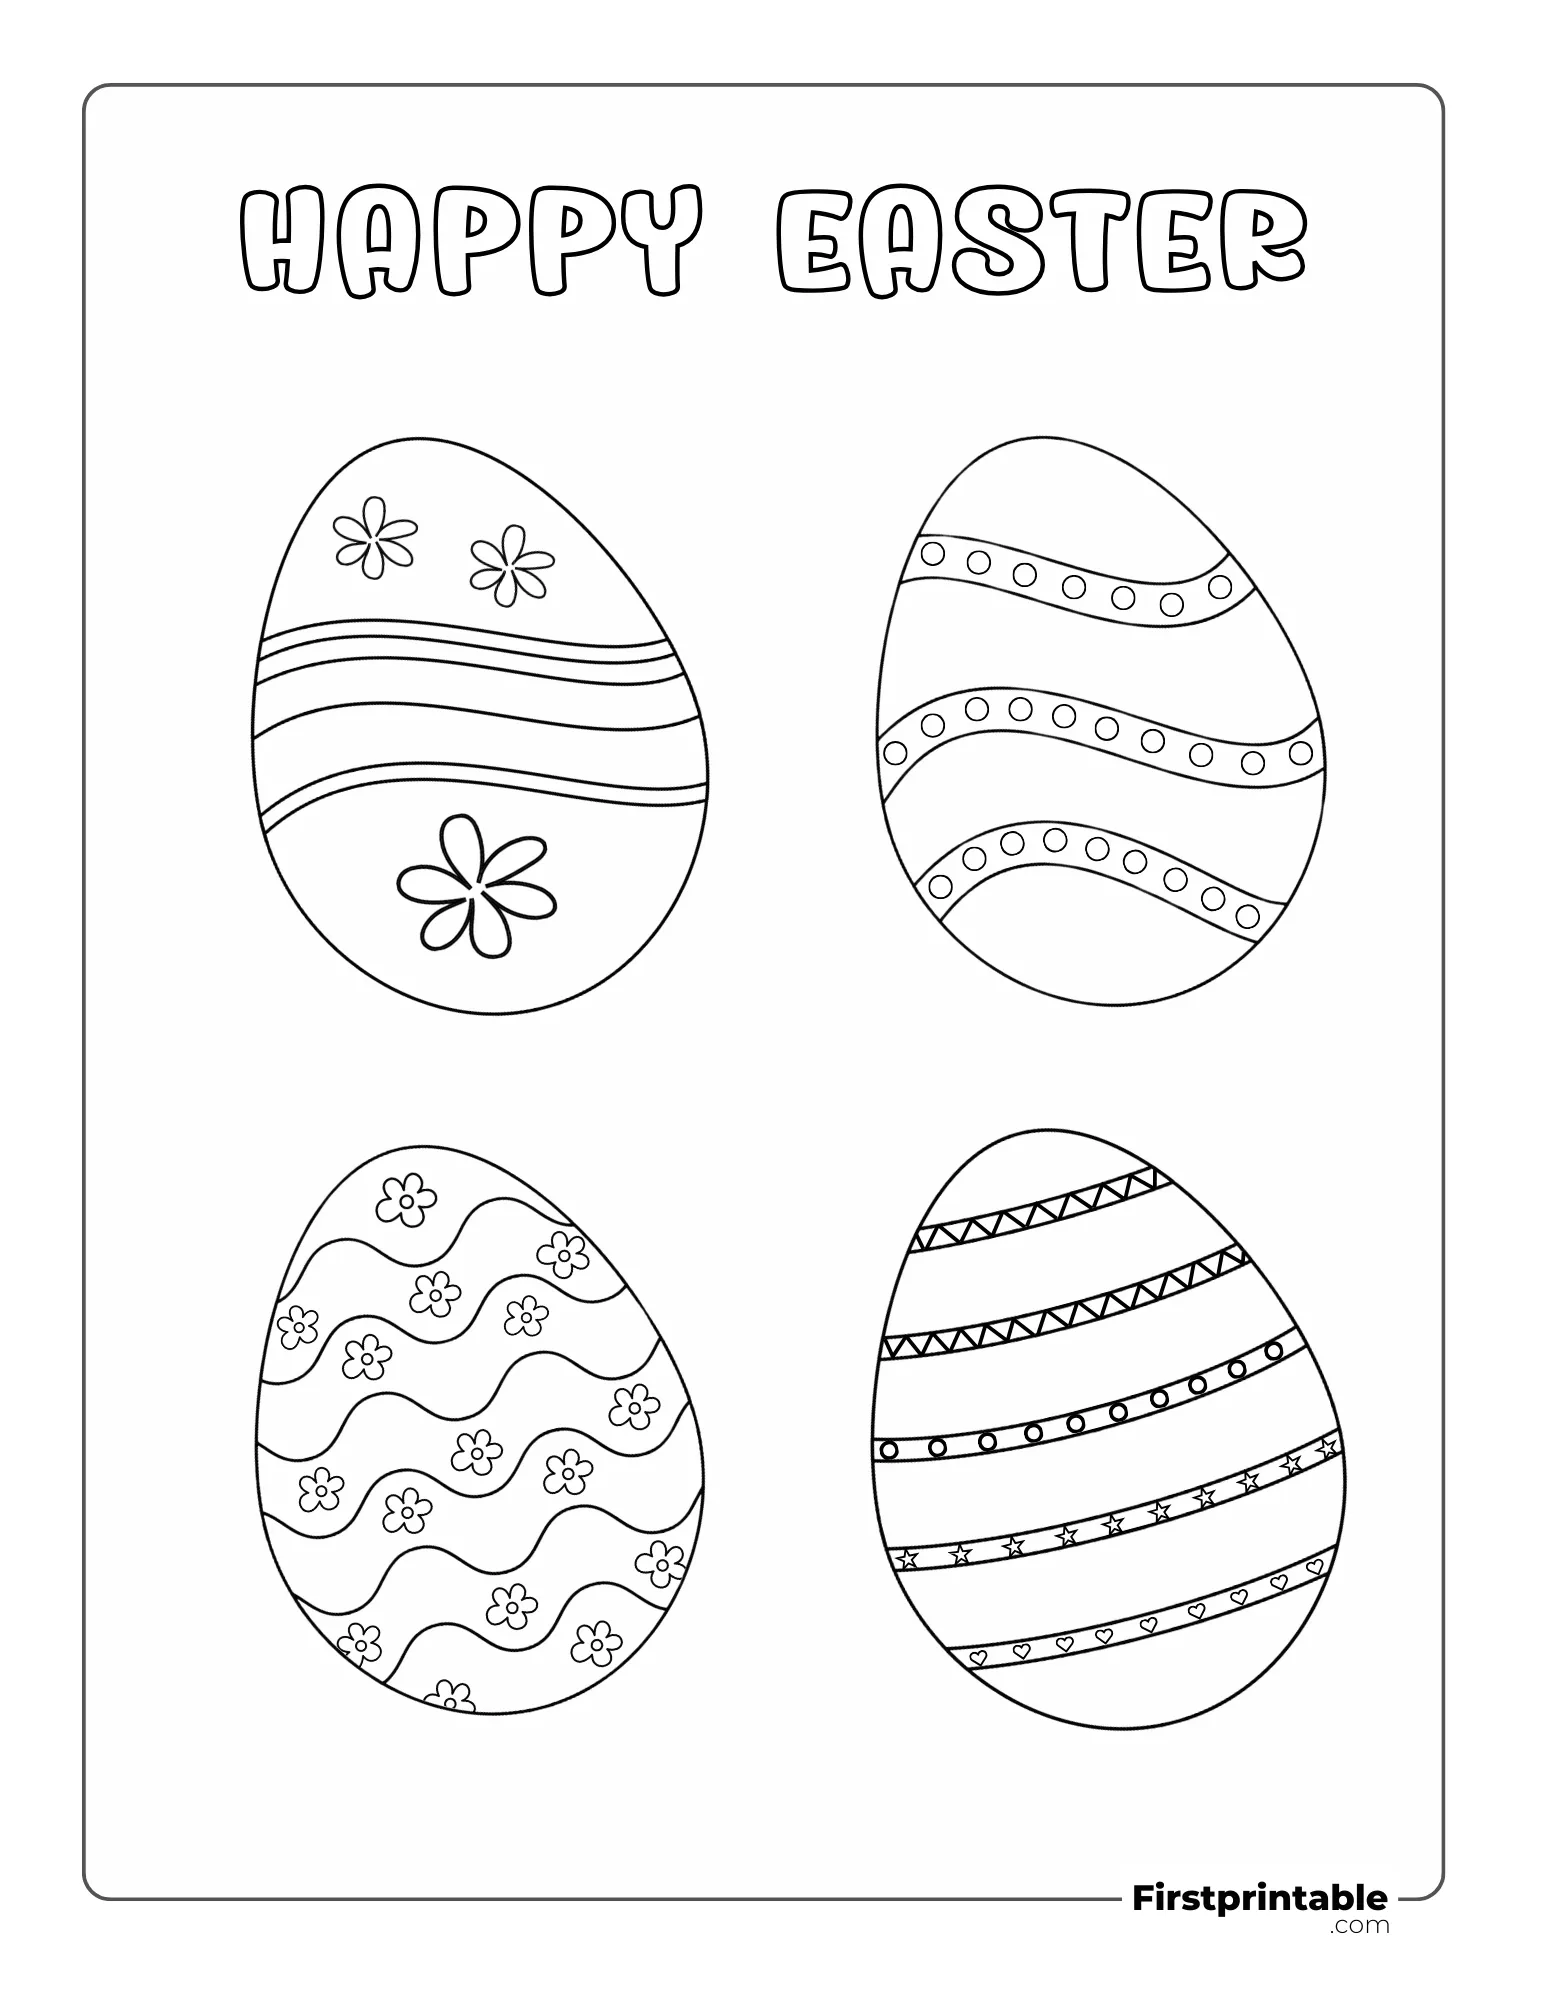 Happy Easter Eggs Coloring Sheet